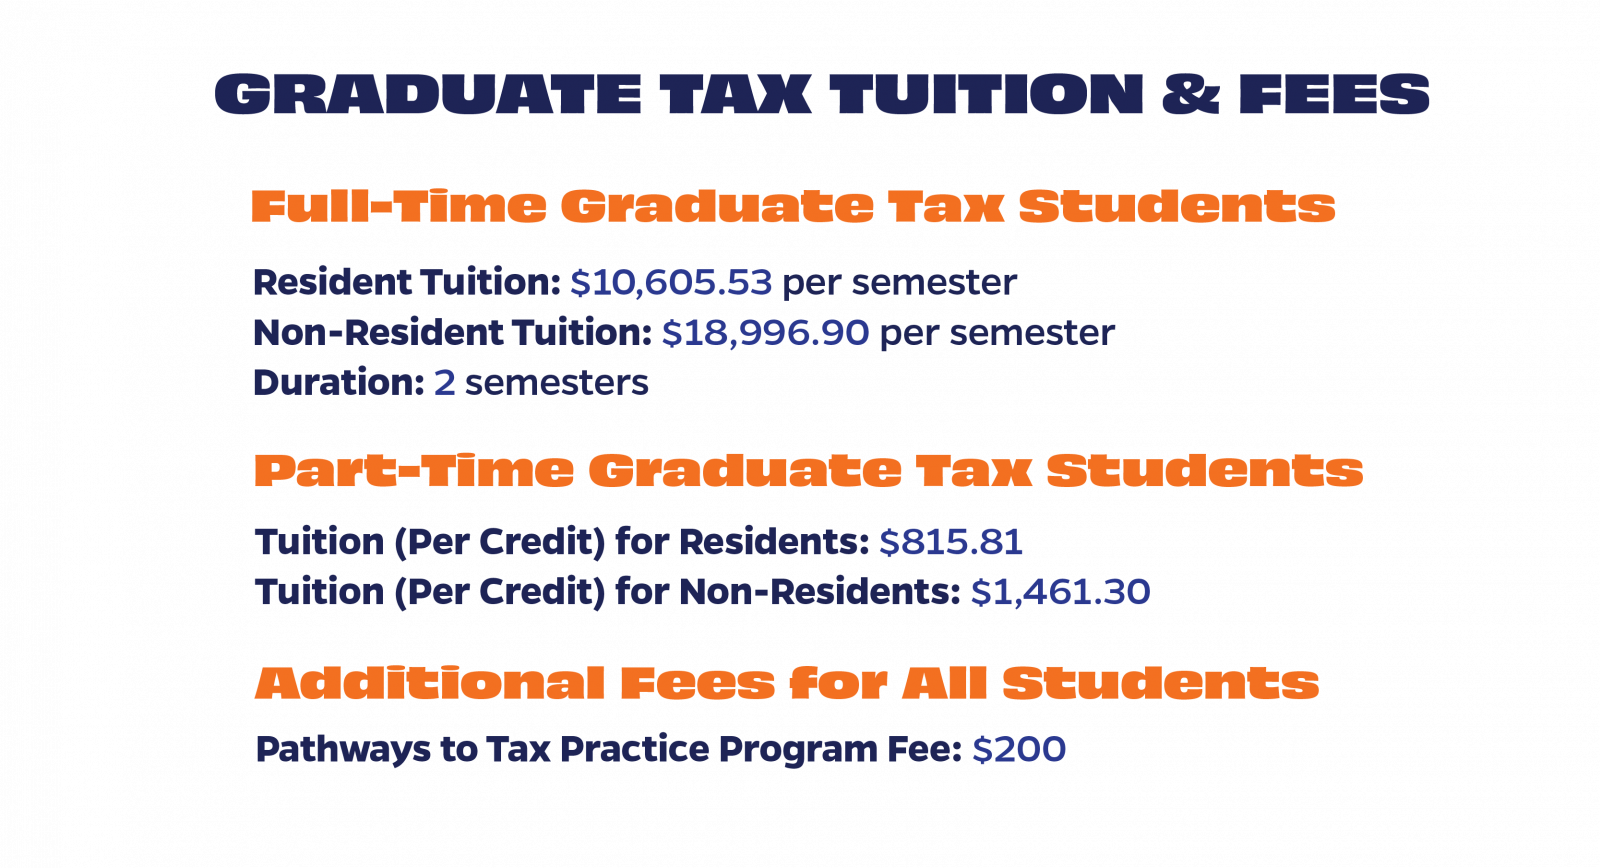 Graduation Tax Tuition & Fees - Full-Time Graduate Tax Students - Resident Tuition: $10,605.53 per semester, Non-resident Tuition: $18,996.90 per semester, Duration: 2 semesters; Part-Time Graduate Tax Students: Tuition (per credit) for Residents: $815.81, Tuition (per credit) for non-residents: $1,461.30; Additional Fees for All Students: Pathways to Tax Practice Program Fee: $200